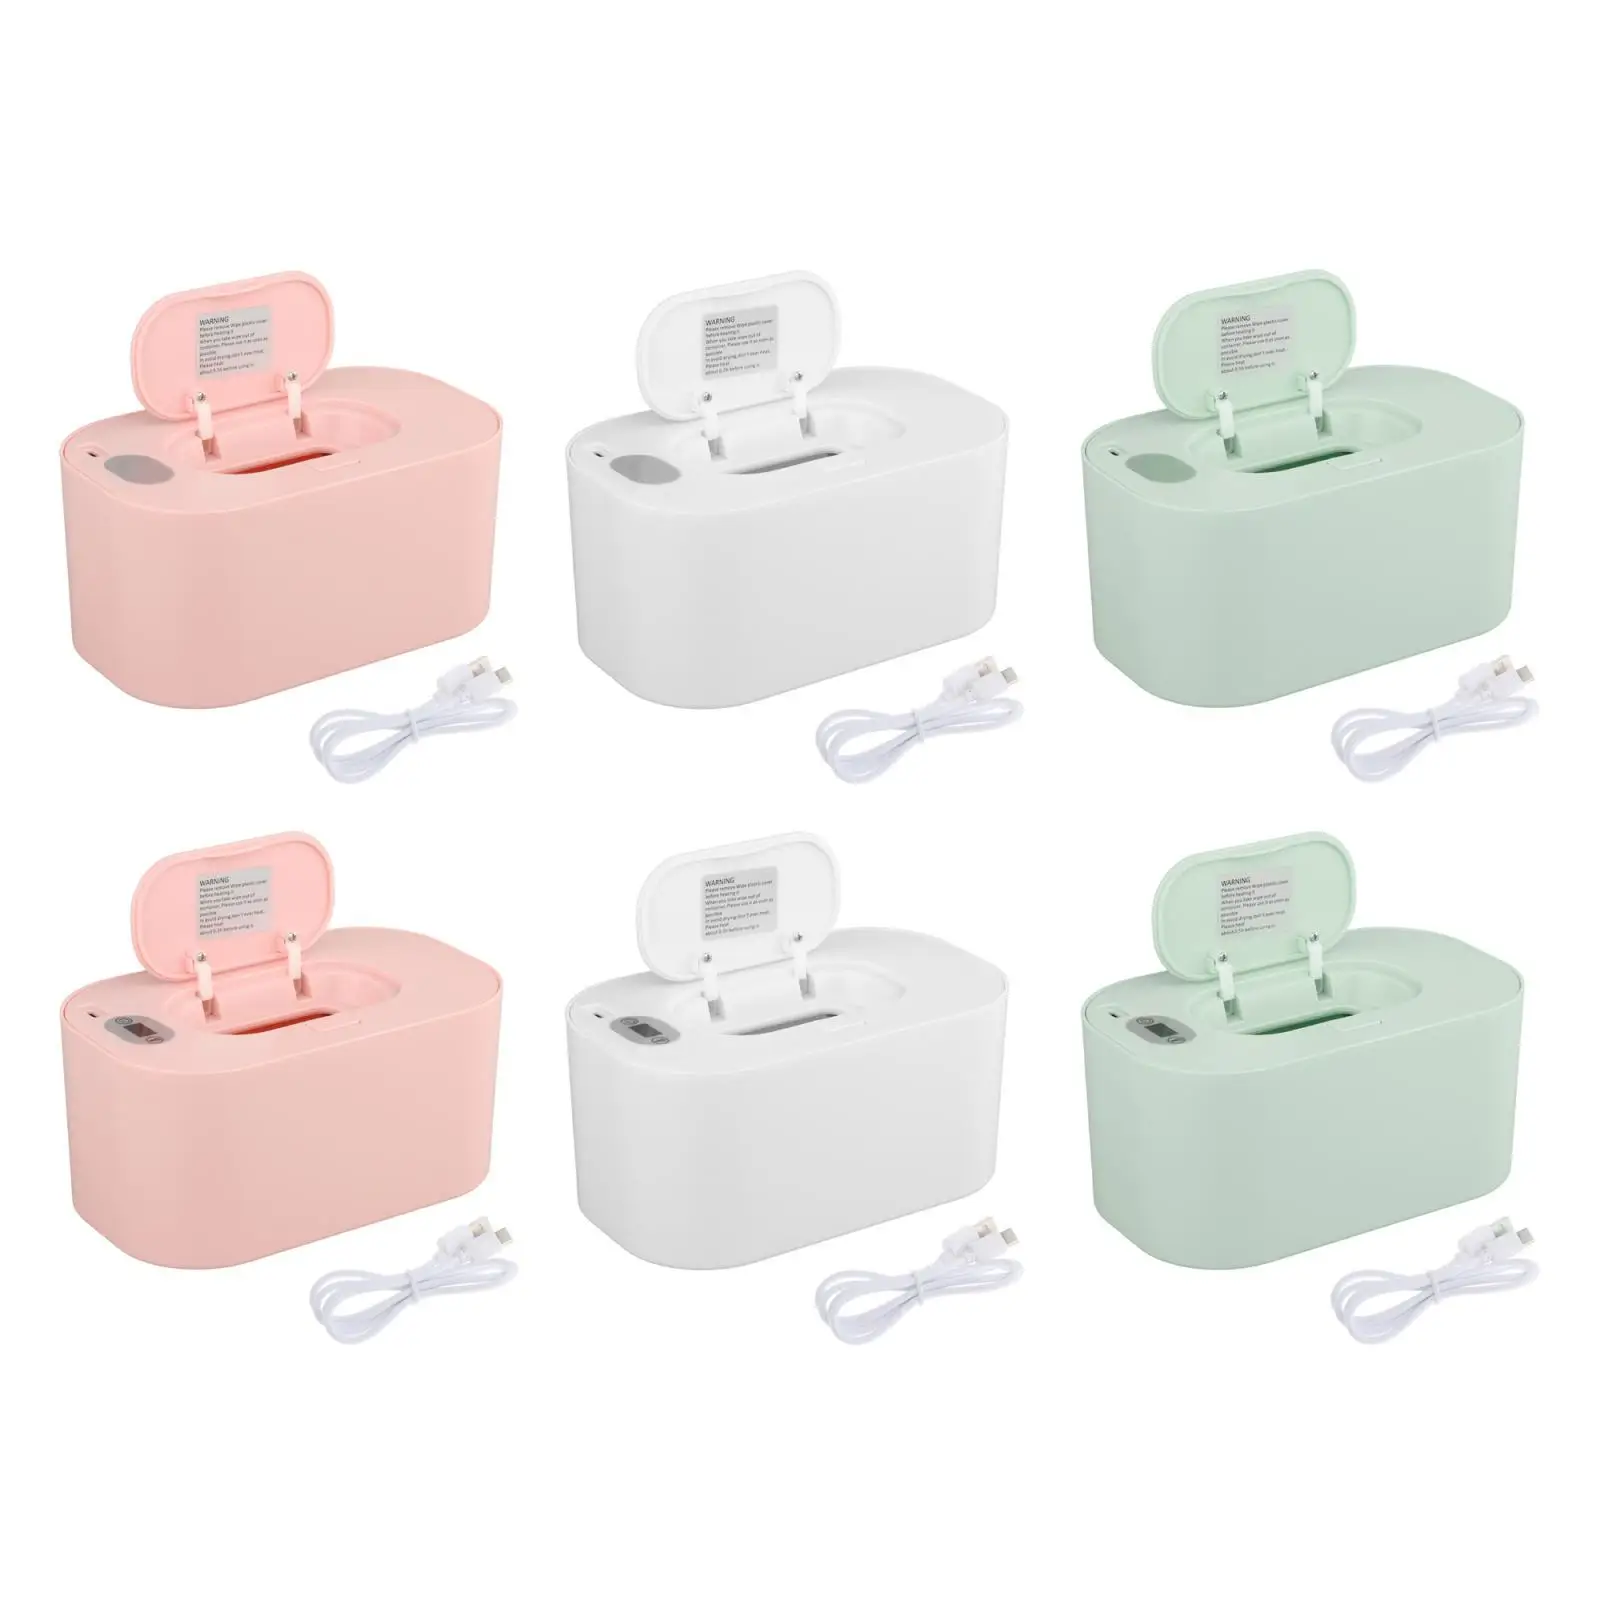 LED Display Baby Wipe Warmer Dispenser USB Charge Quick Heating System Wet Wipe Warmer for Travel Car Wet Tissue Household